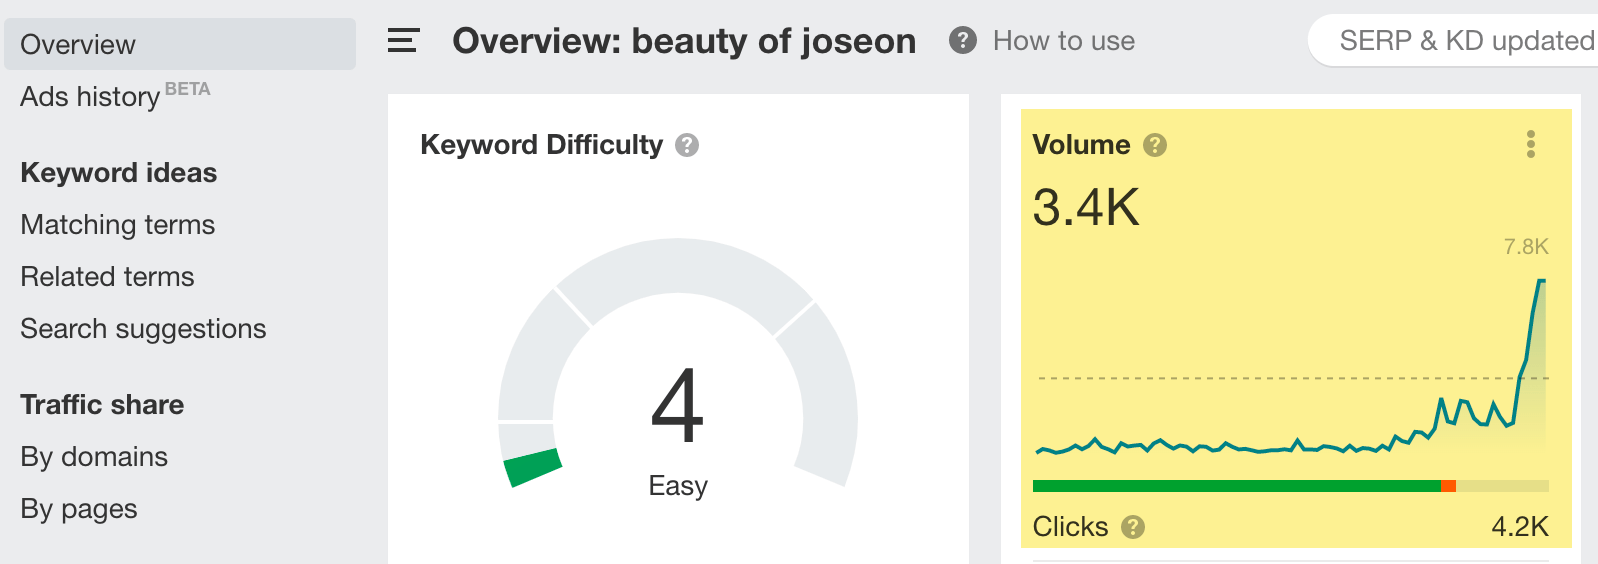 Overview of the keyword explorer for "joseon beauty" 